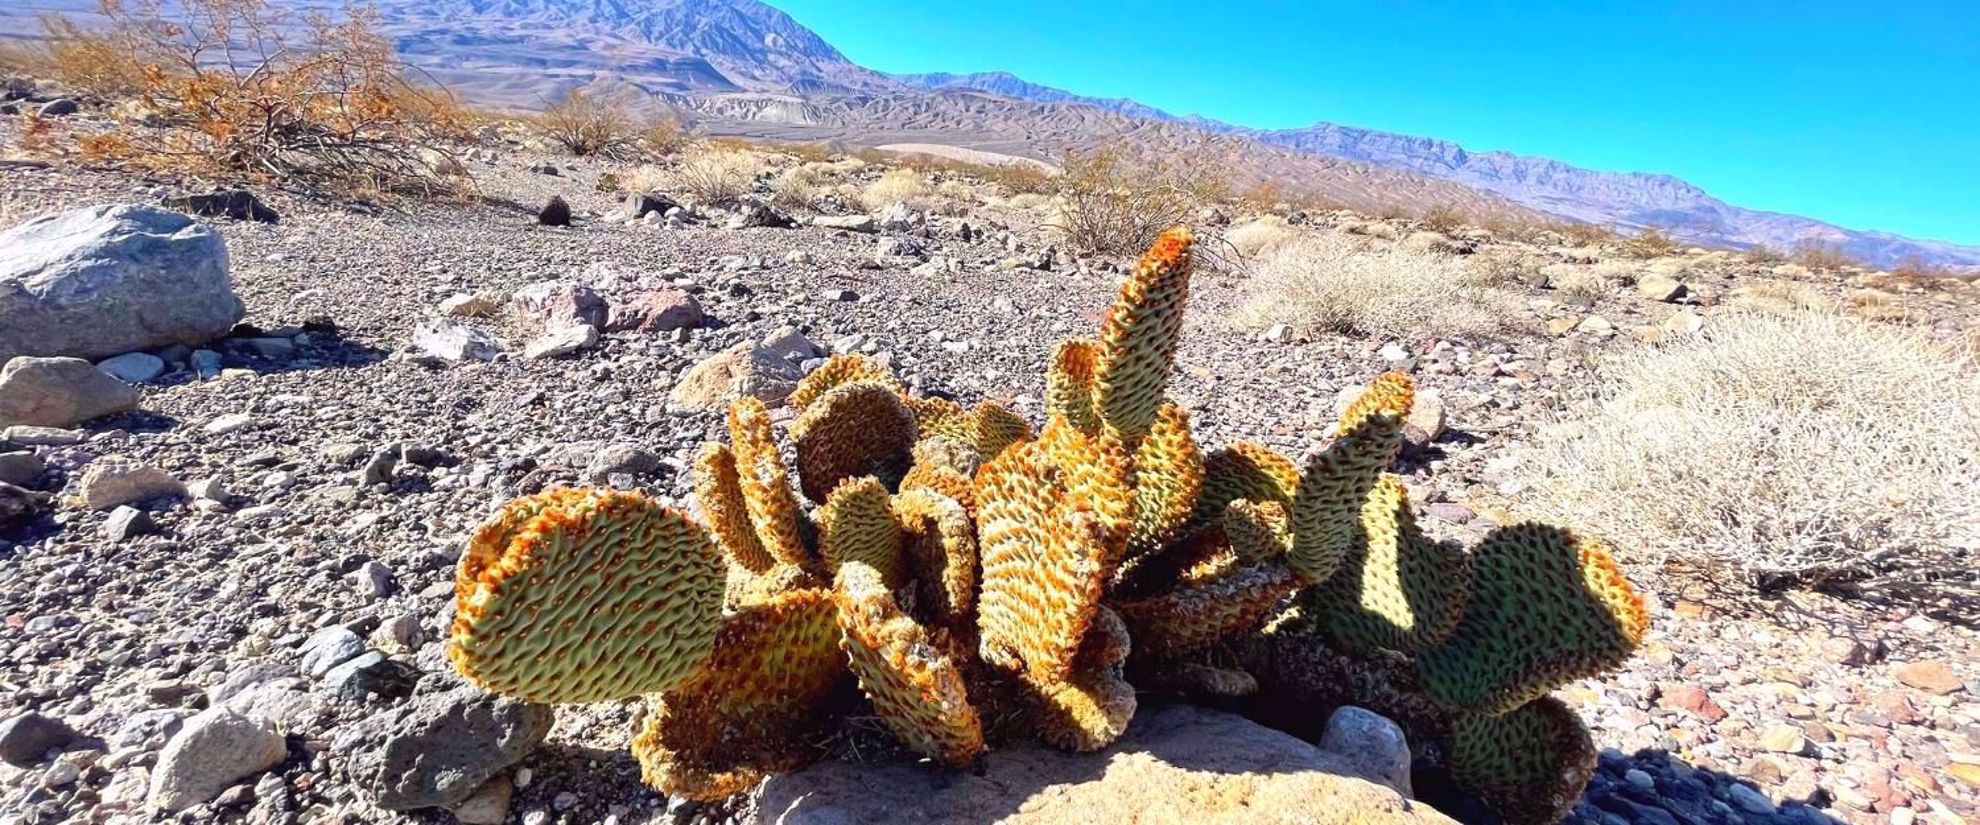 desert flora and fauna in death valley